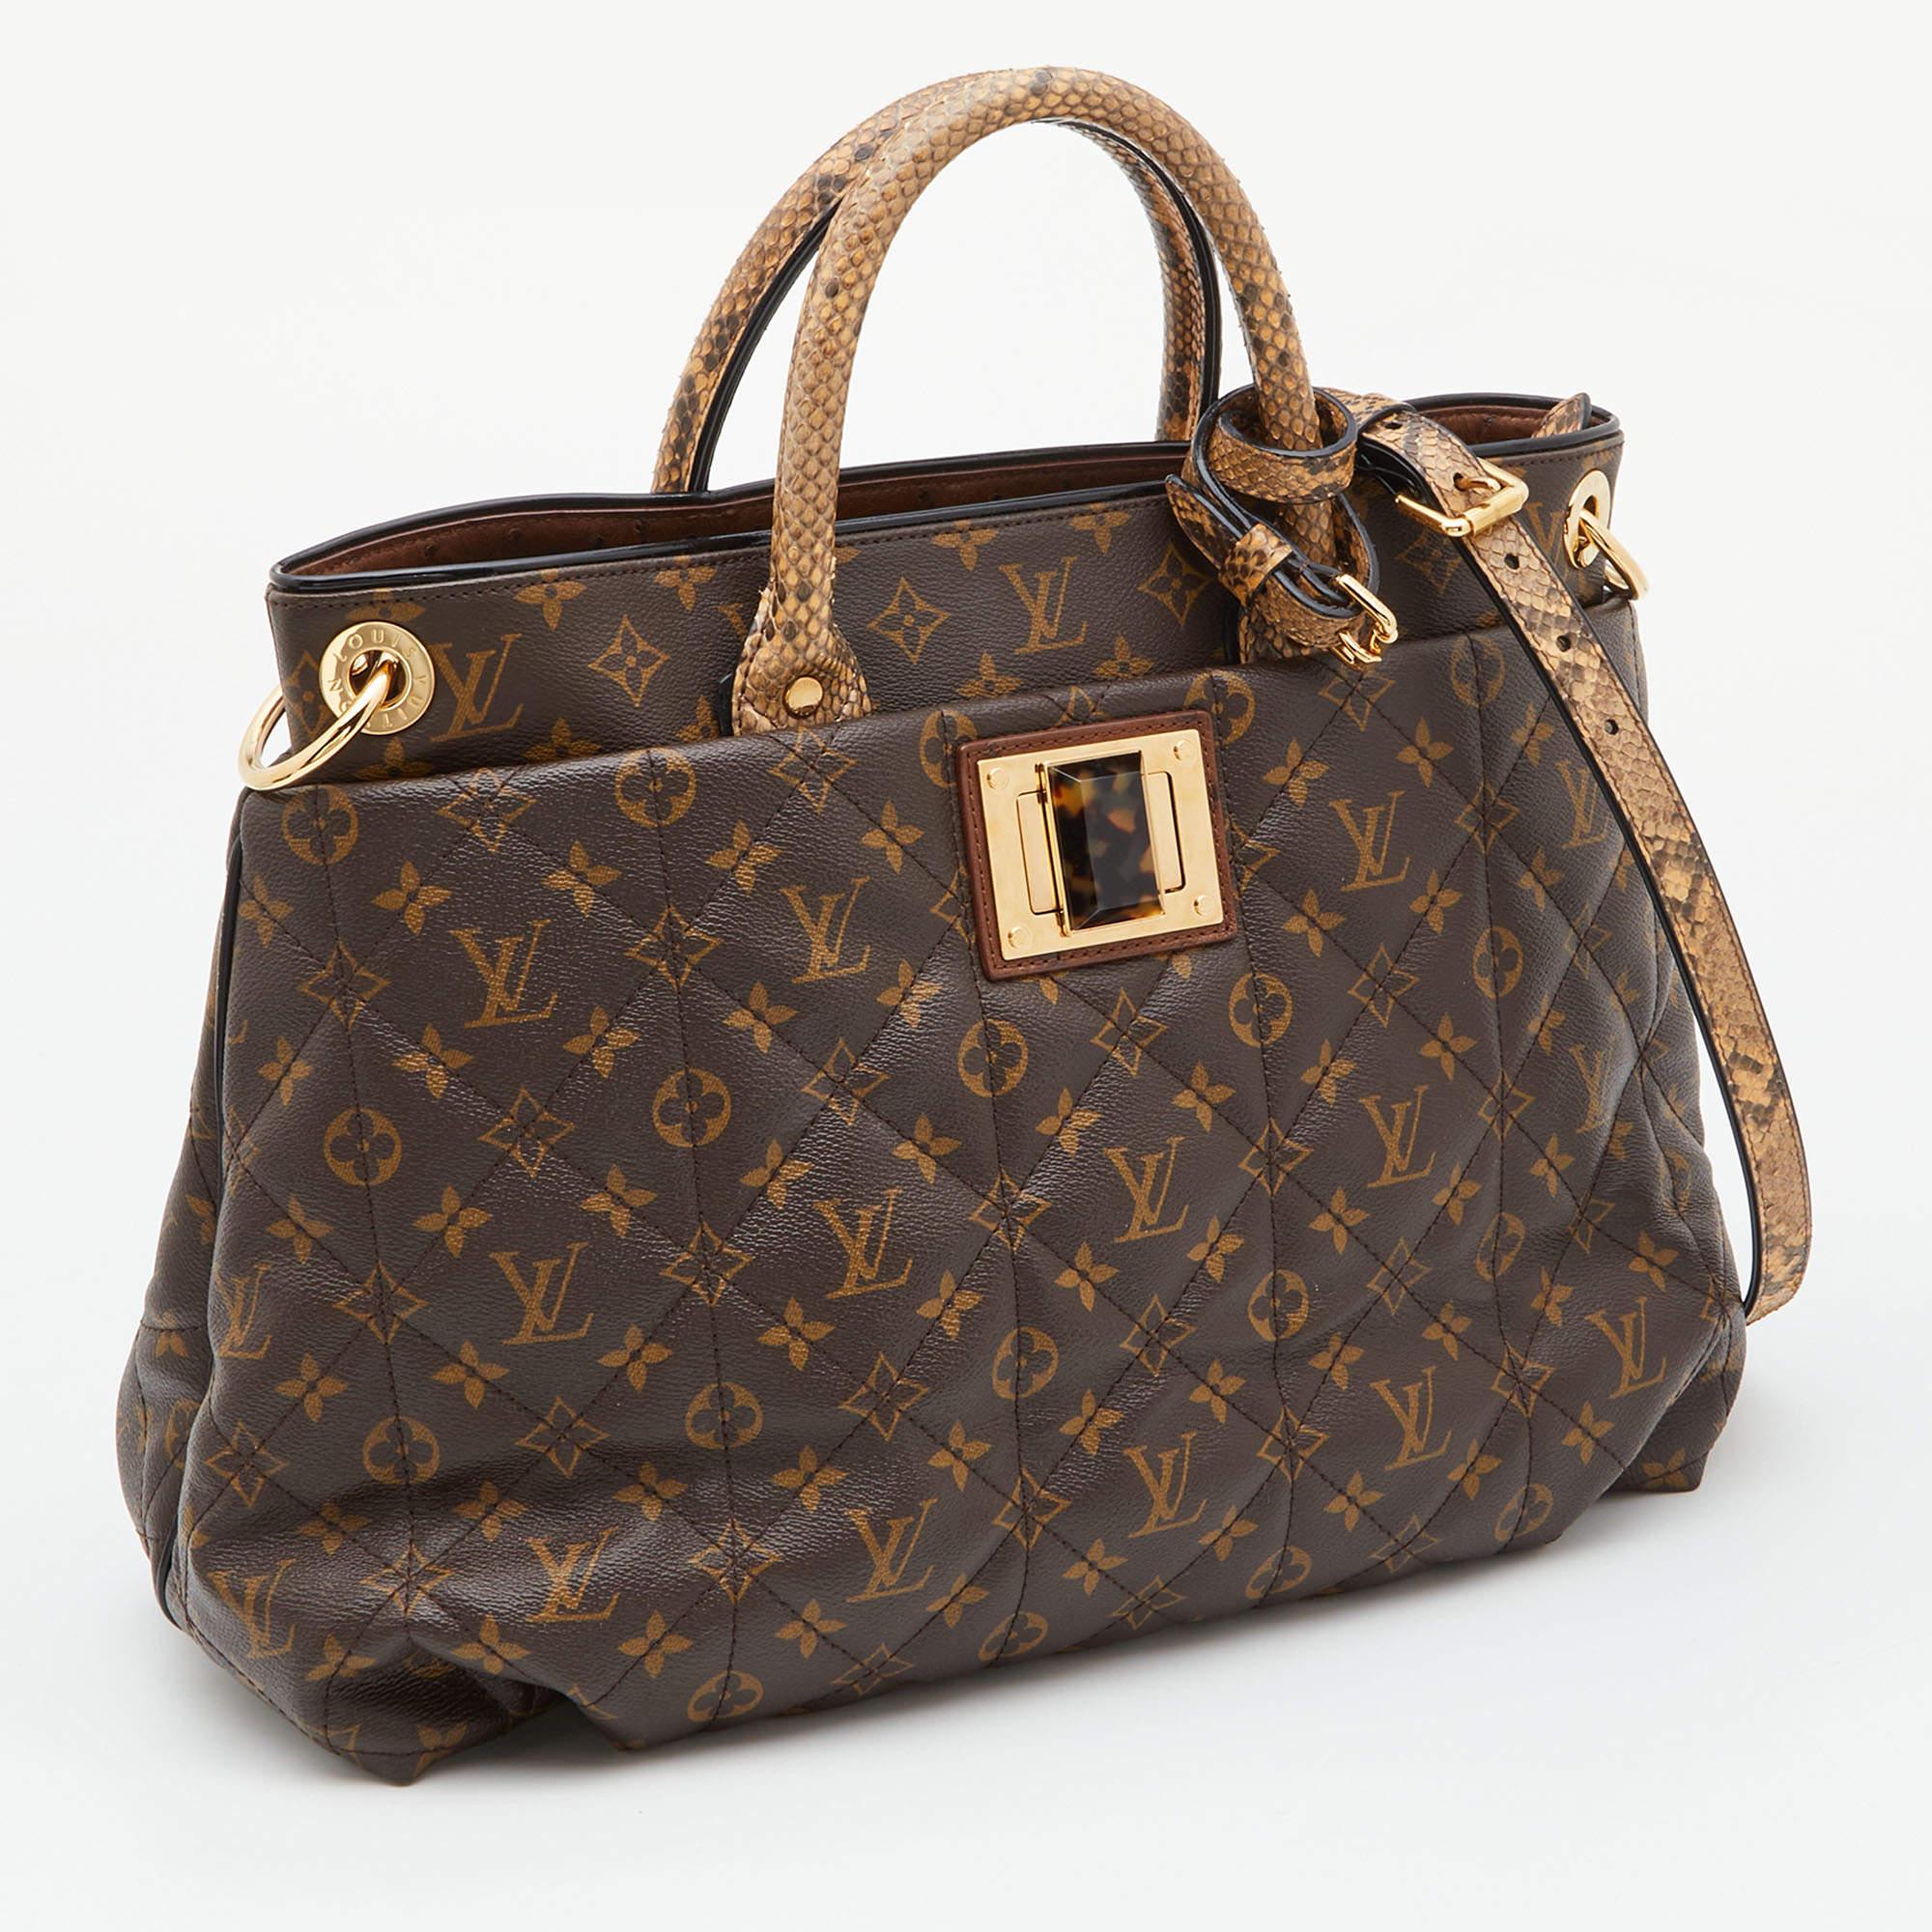 The luxurious and rare edition of the Etoile Exotique GM Bag from Louis Vuitton is crafted in the signature LV Monogram canvas. The tote comes equipped with python top handles and a shoulder strap that can be removed. Gold-tone hardware lends it a